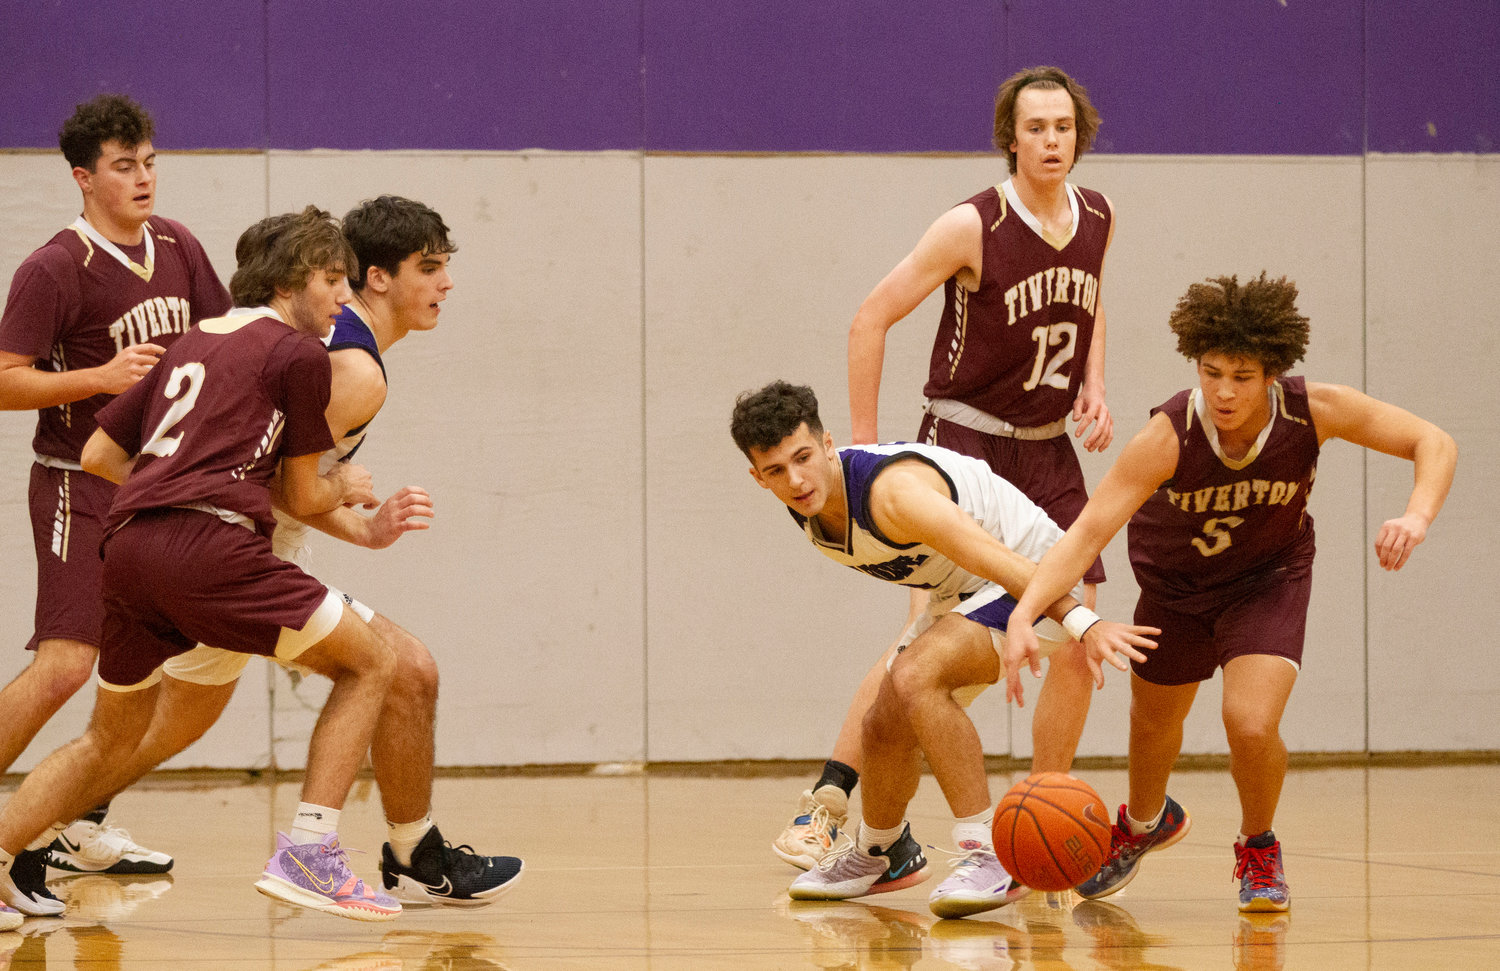 Tiverton’s Tristin White (right) steals the ball off the Huskes’ Parker Camelo in the first half as Tiverton defenders Keegan Dutelle (left), Logan Bouchard and Jason Potvin look on with the Huskies’ Ben Calouro.